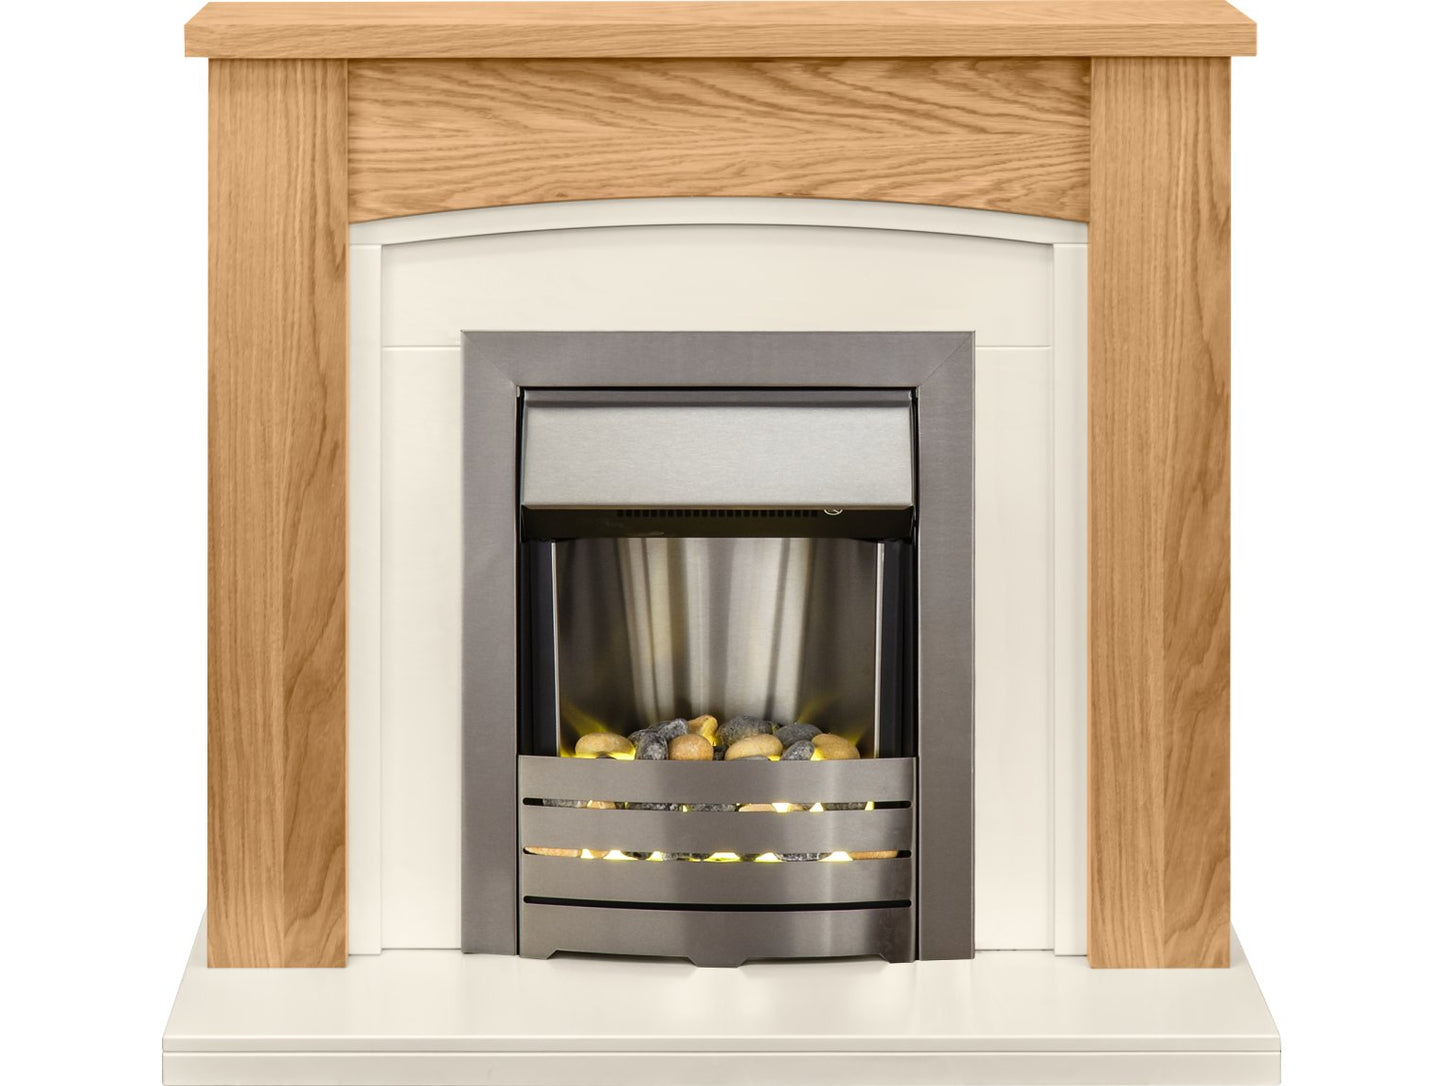 Adam Chilton Fireplace Suite in Oak with Helios Electric Fire in Brushed Steel, 39 Inch